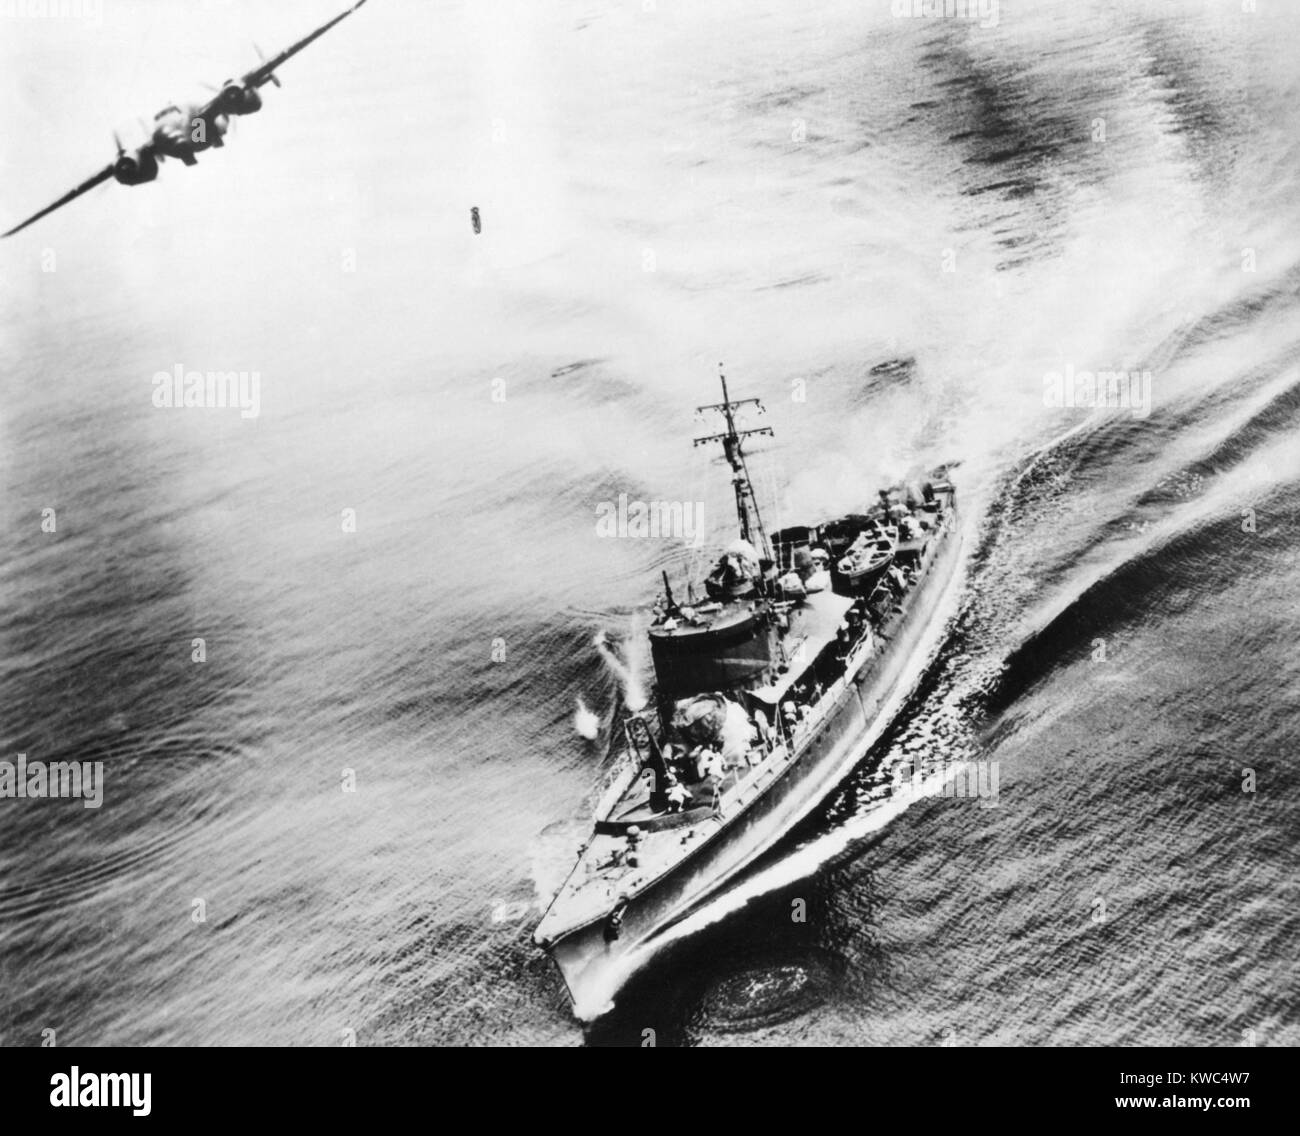 Small Japanese war vessel bombed by U.S. B-25 bomber in the Bismarck Sea, March 21, 1944. The ships crew can be seen running for cover. The ship was sunk by the attack near New Ireland. World War 2 (BSLOC 2015 13 121) Stock Photo